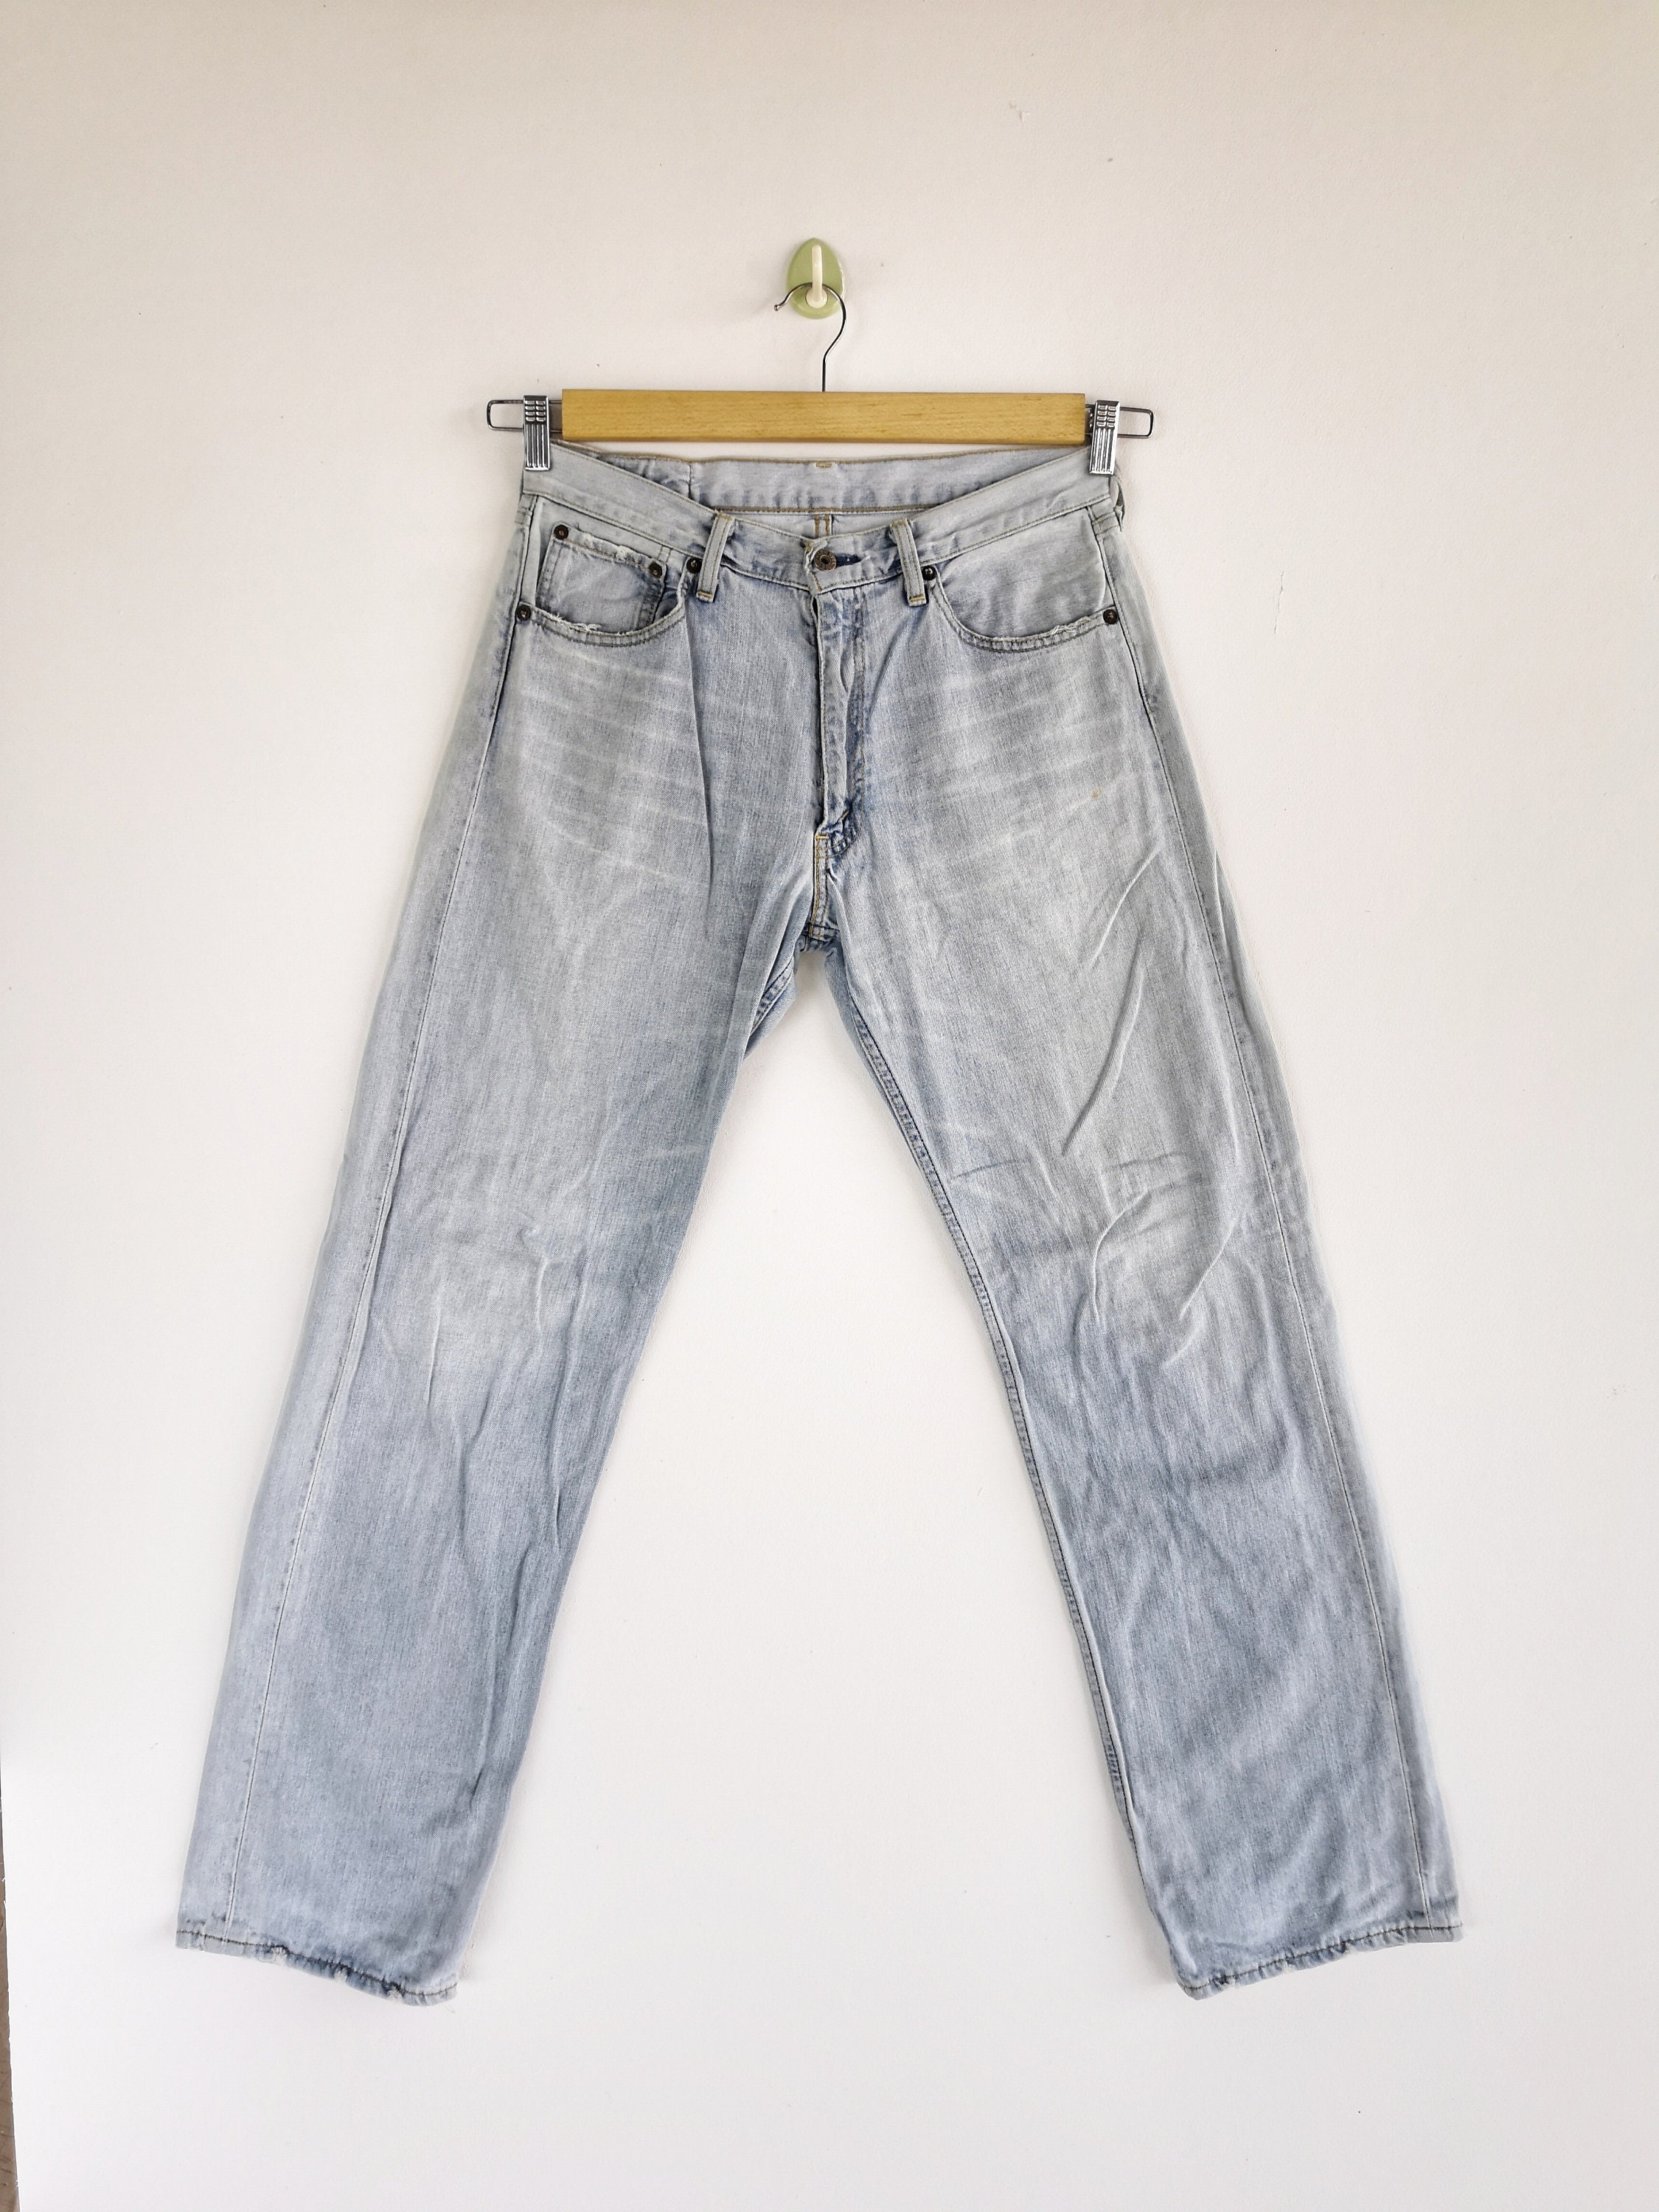 W30 L32 Vintage Levi 503 Jeans Relaxed Fit Levi's 503 High - Etsy